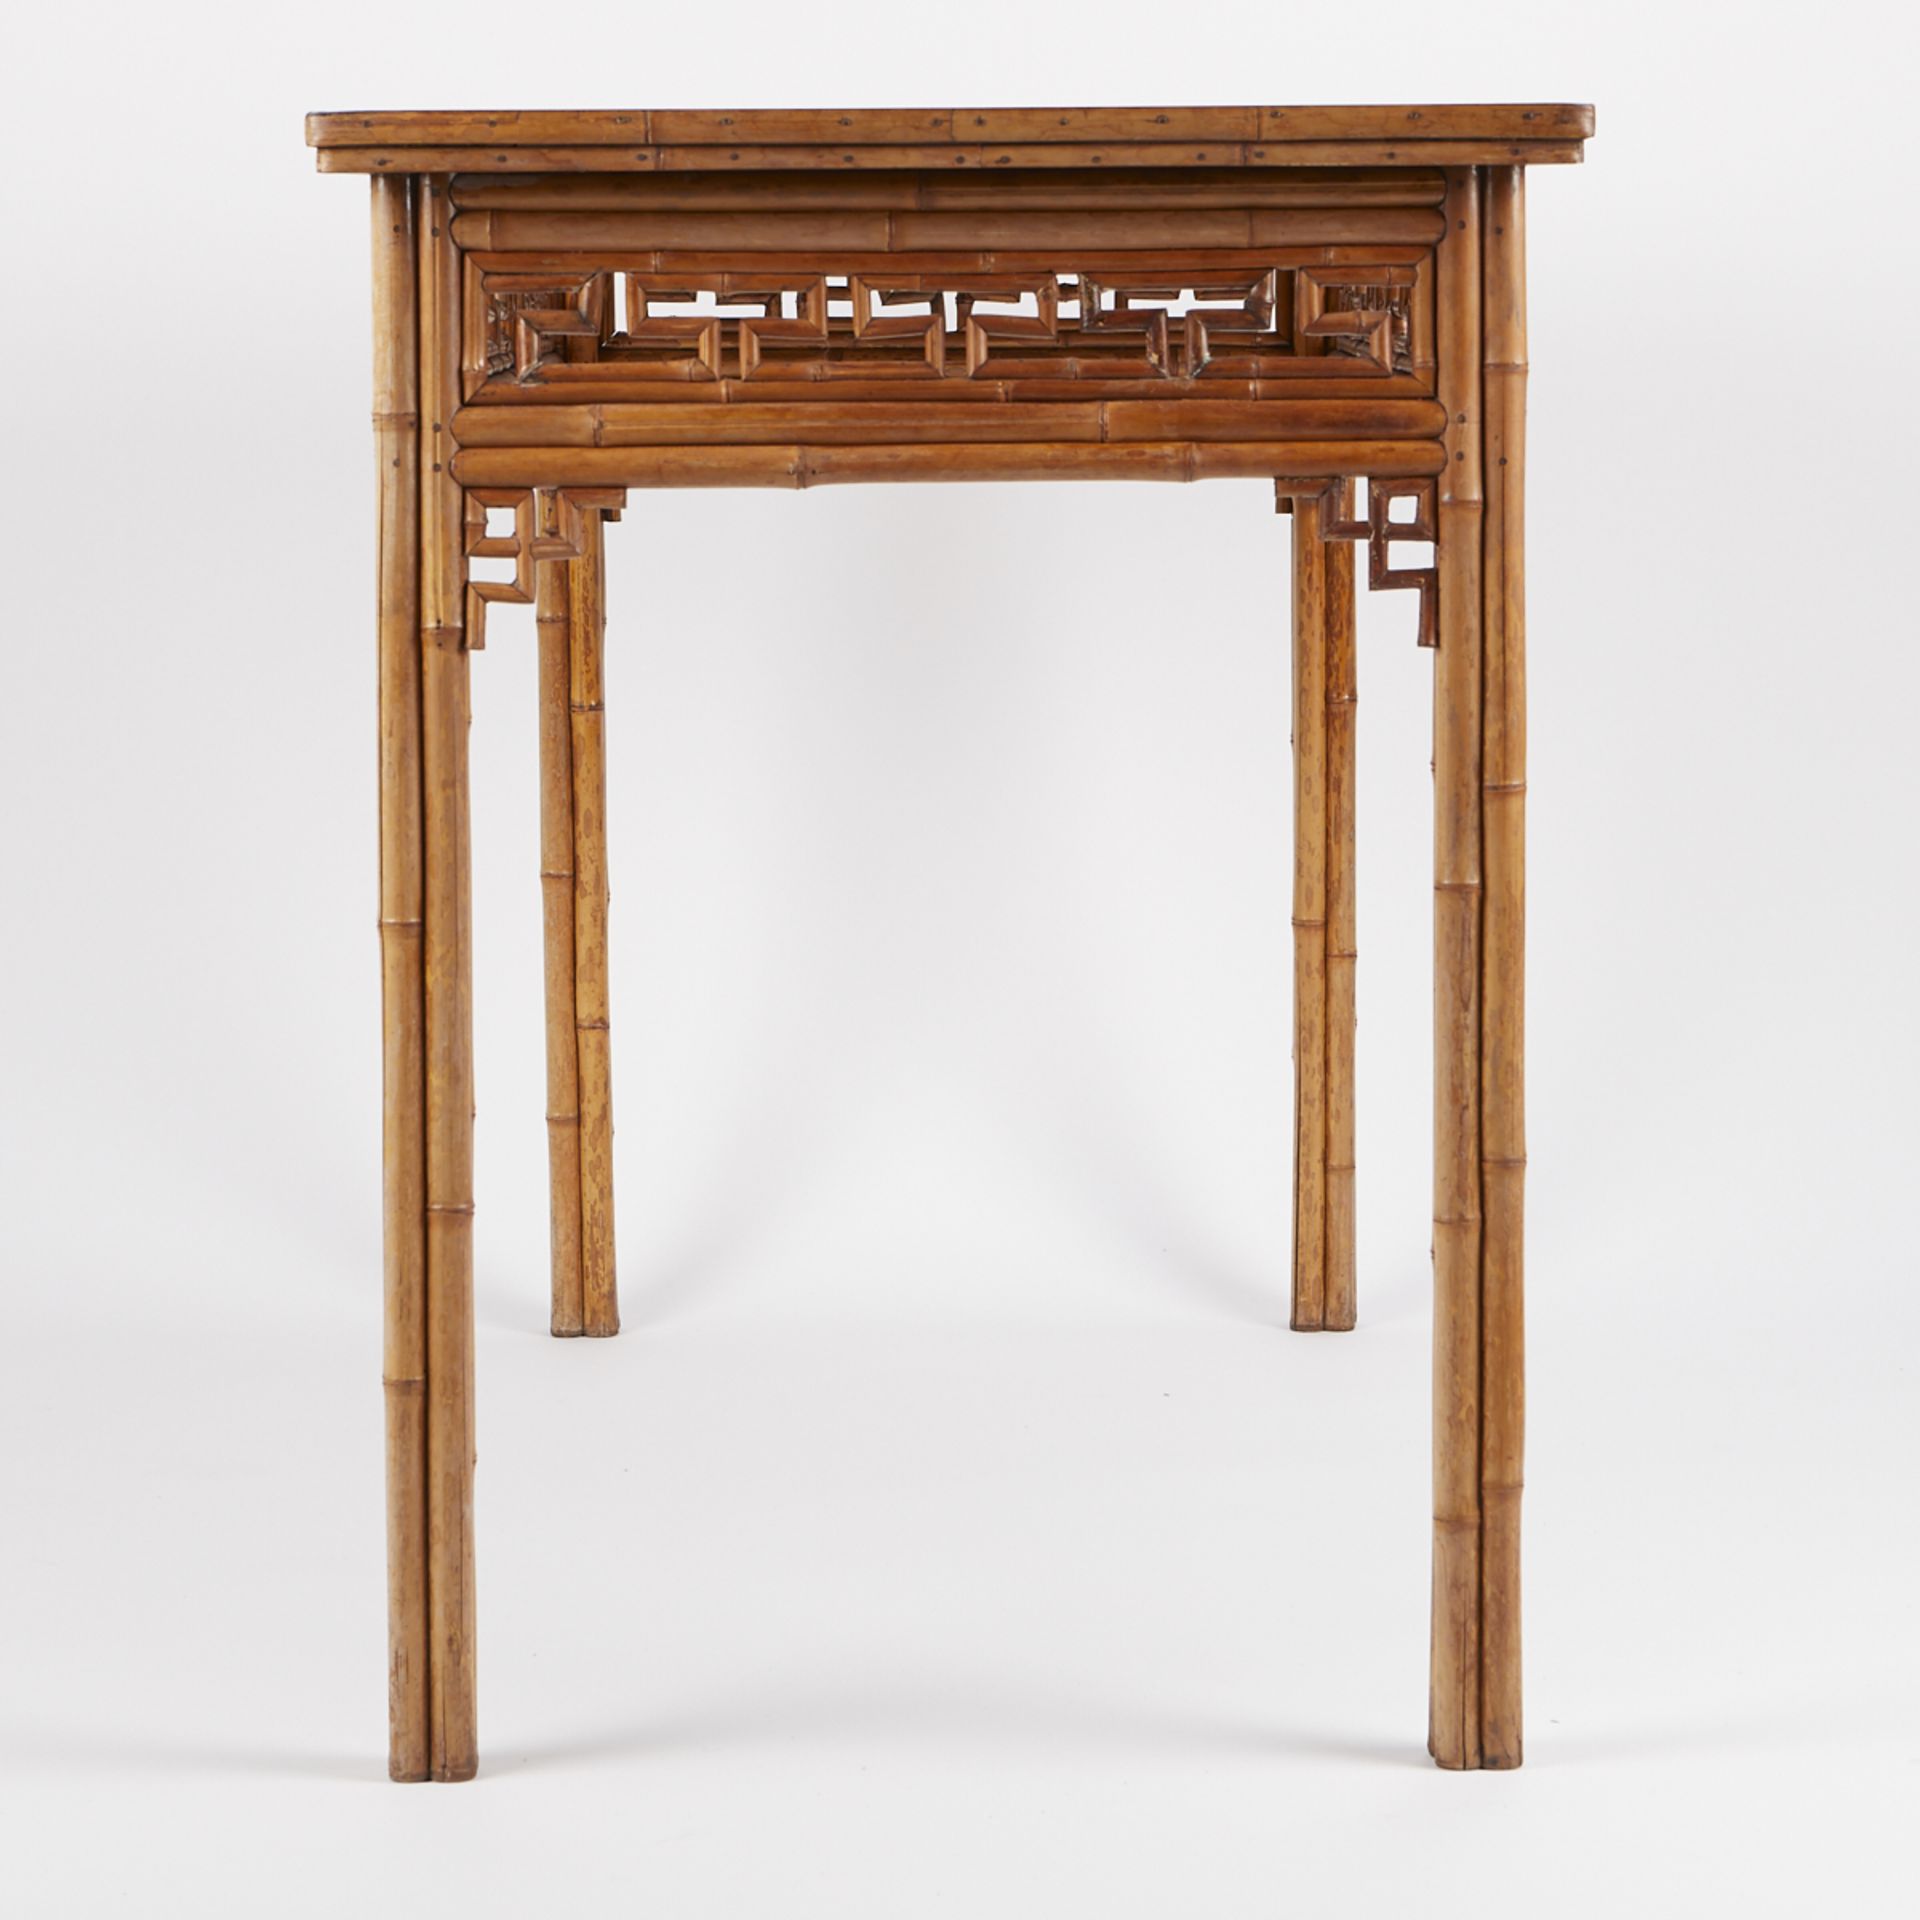 Chinese Bamboo Lacquer Rectangular Table - Image 5 of 7